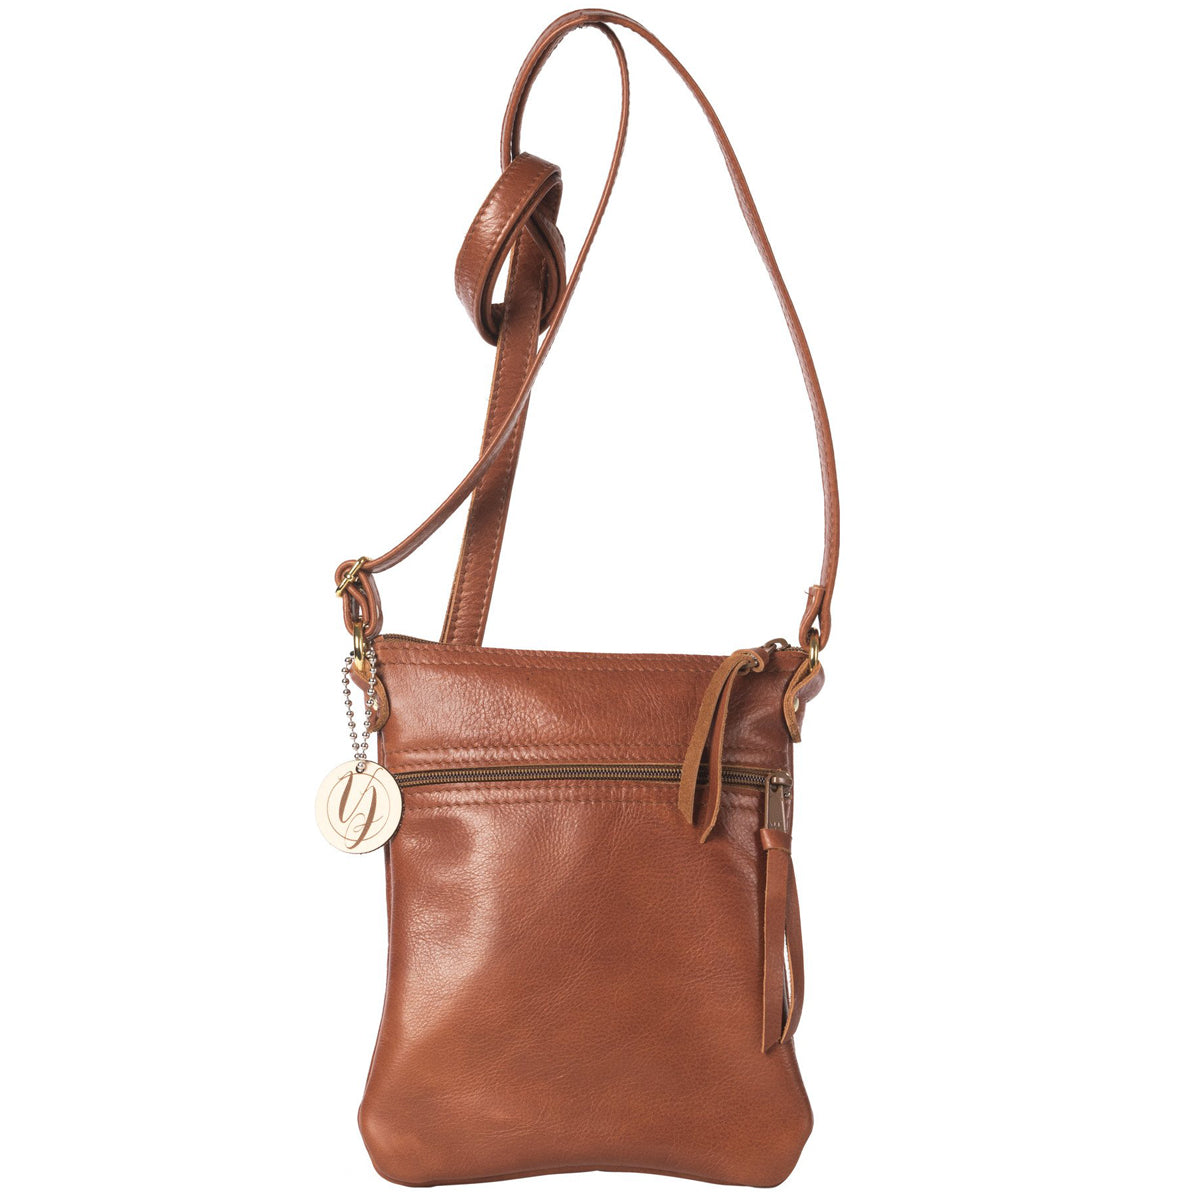 Handmadeclubshop Leather Cross Body Bags for Women Real 